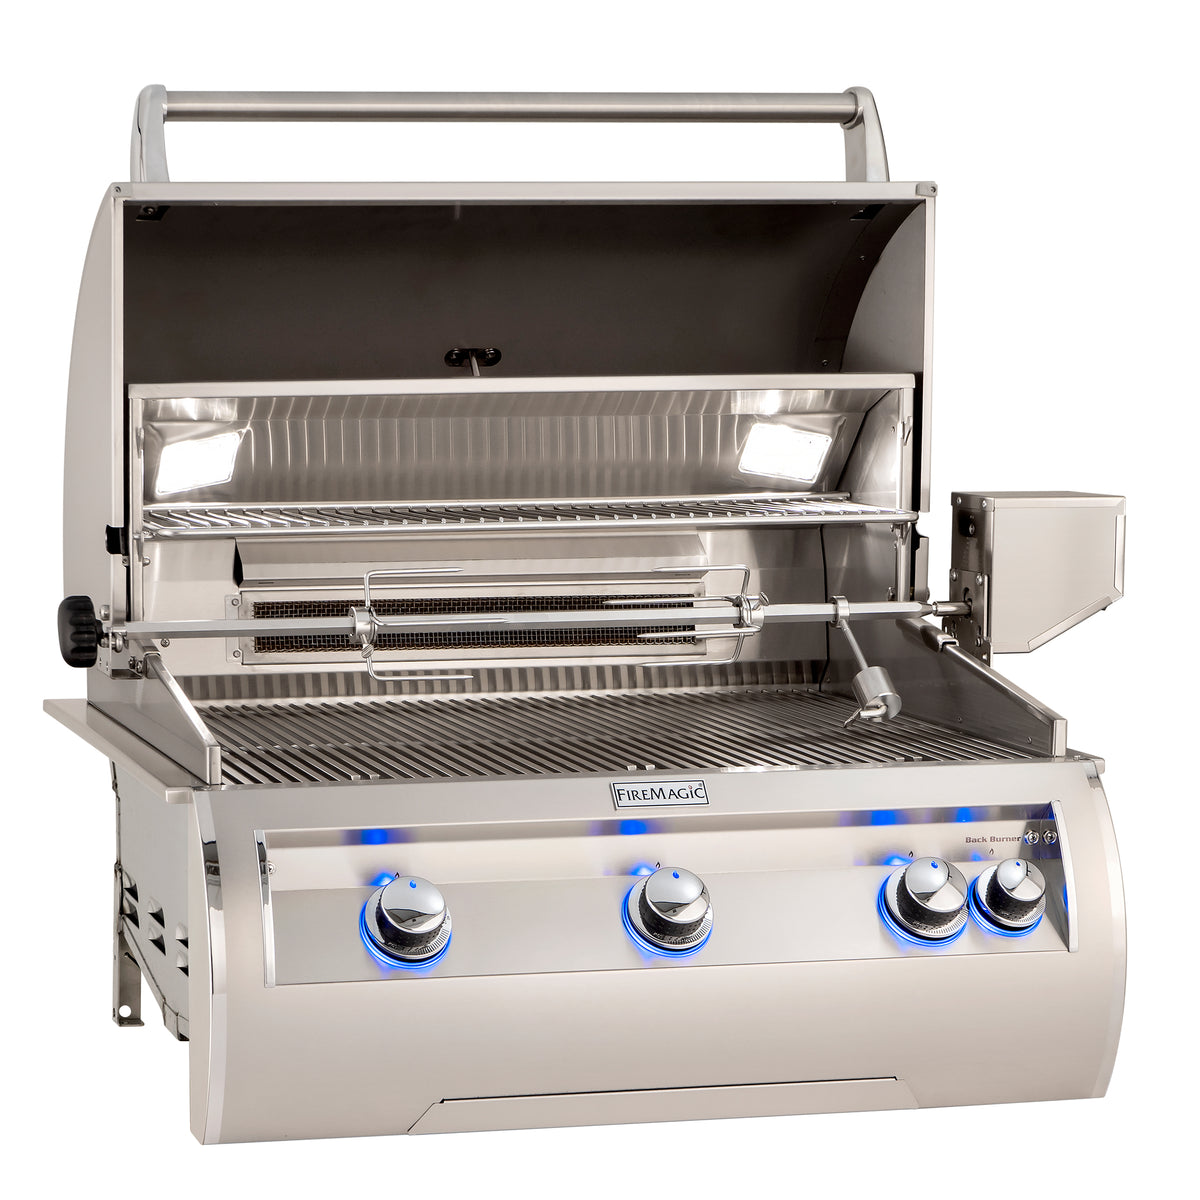 Fire Magic Echelon E660i Built-In Grill With Analog Thermometer